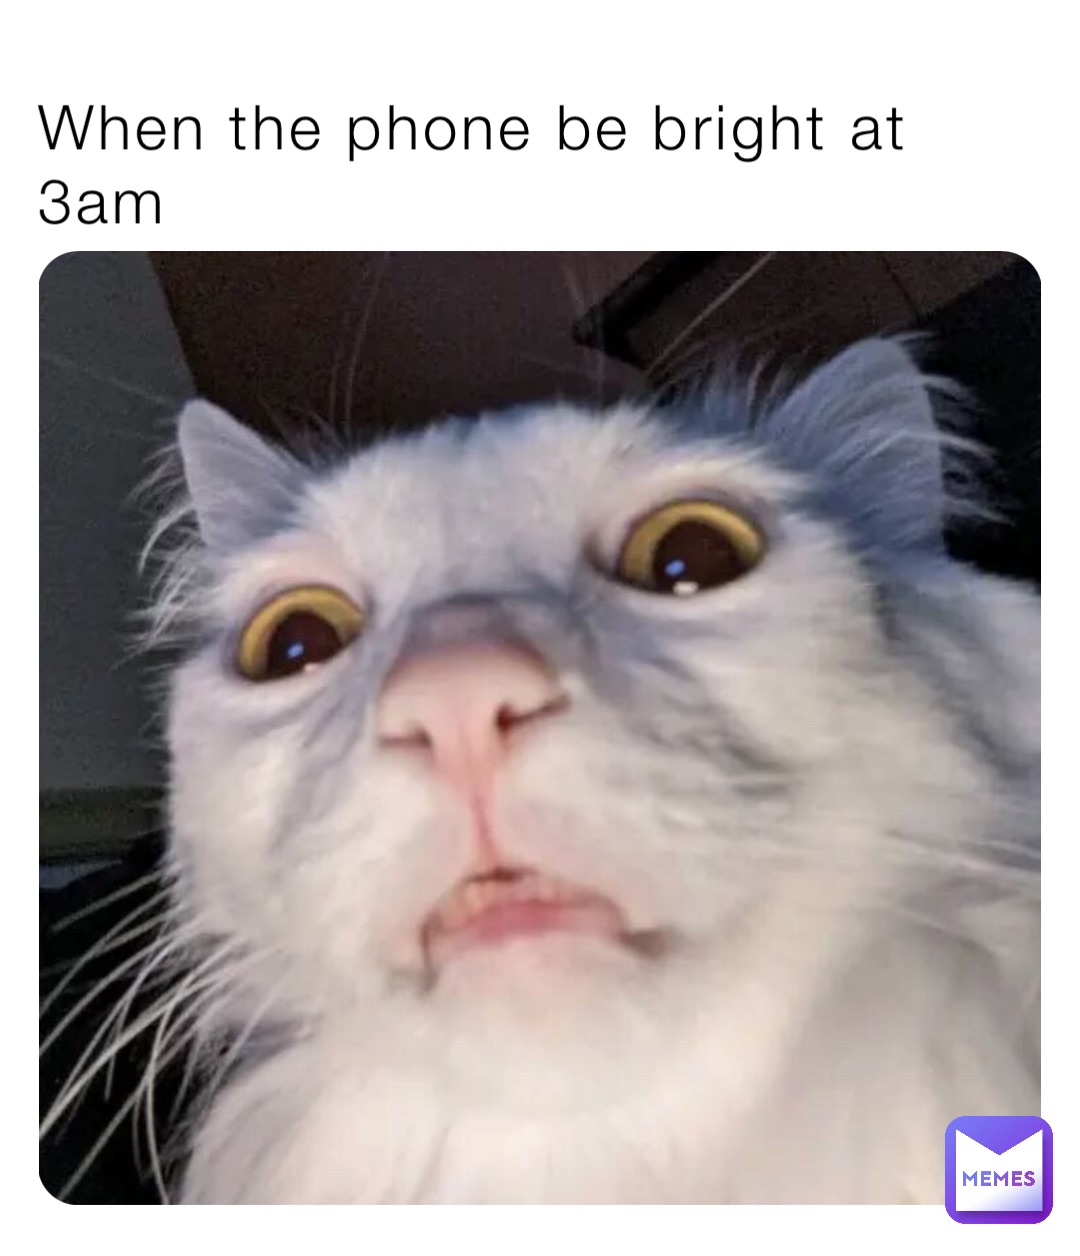 When the phone be bright at 3am